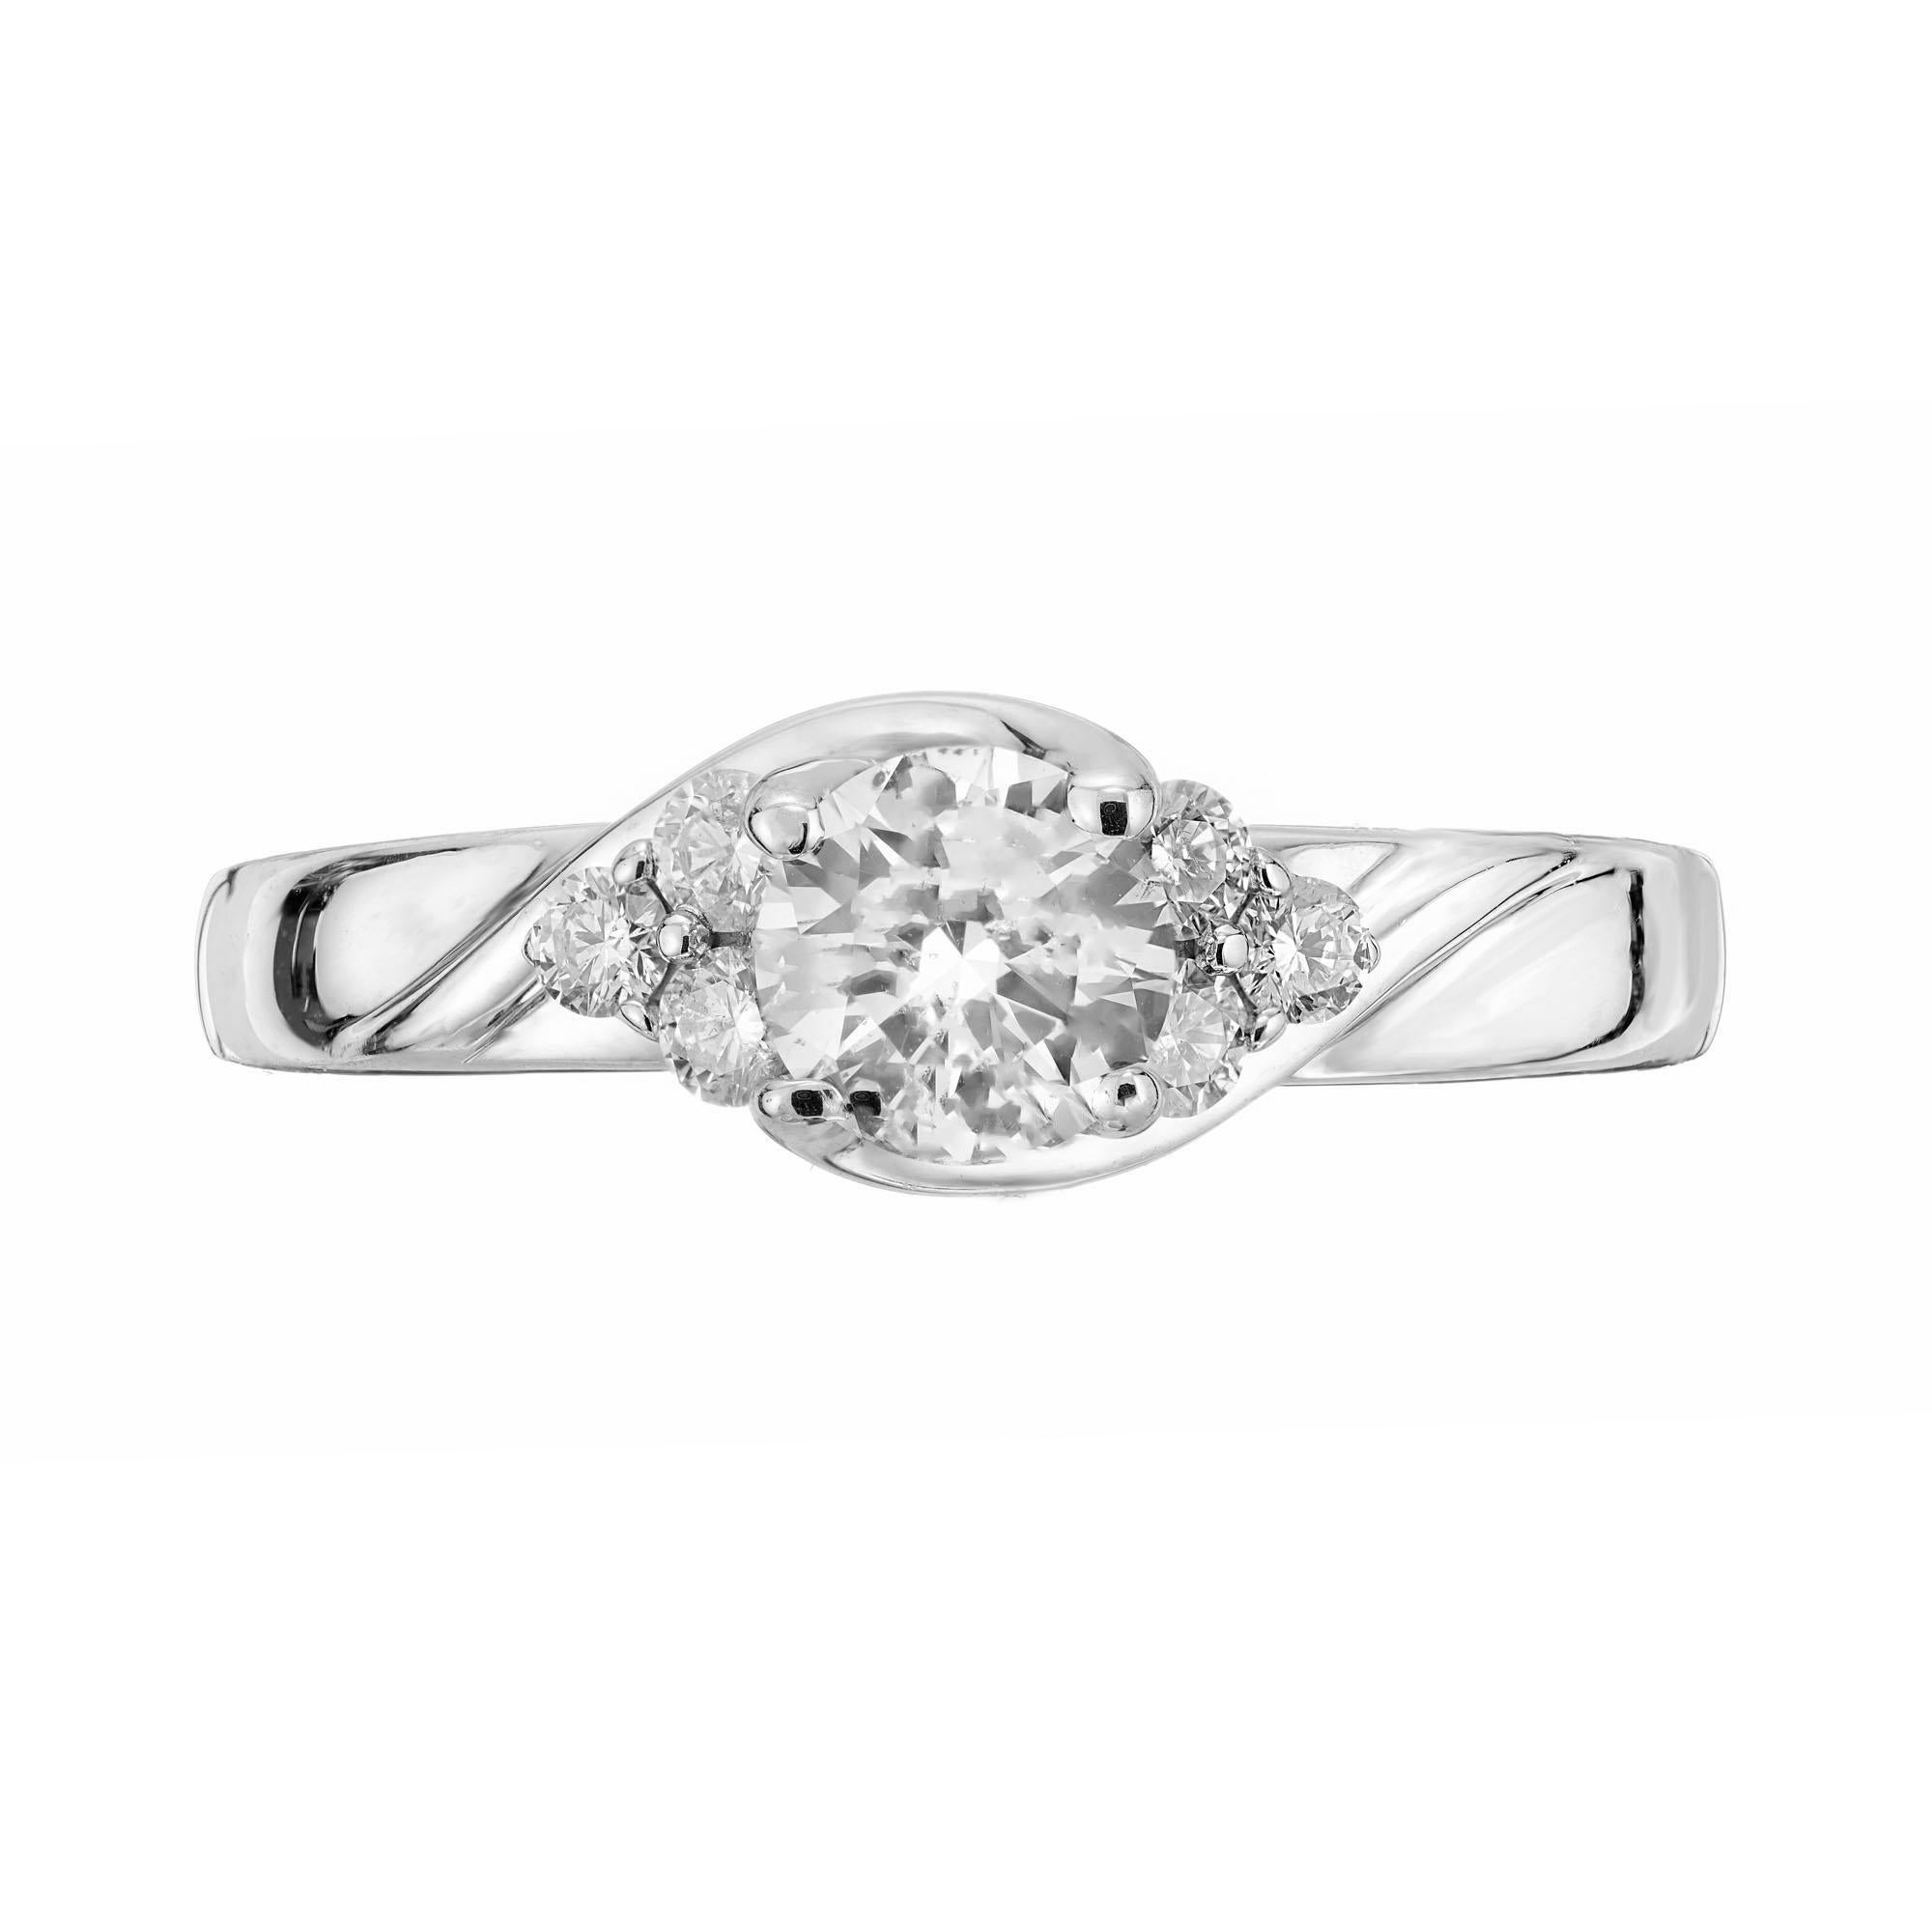 Swirl design white gold Diamond engagement ring with an EGL certified round center Diamond in a 14k white gold setting. Accented with 3 full cut Diamonds on each side. 

1 round Diamond, approx. total weight .76cts, F – G, I1, EGL certificate #